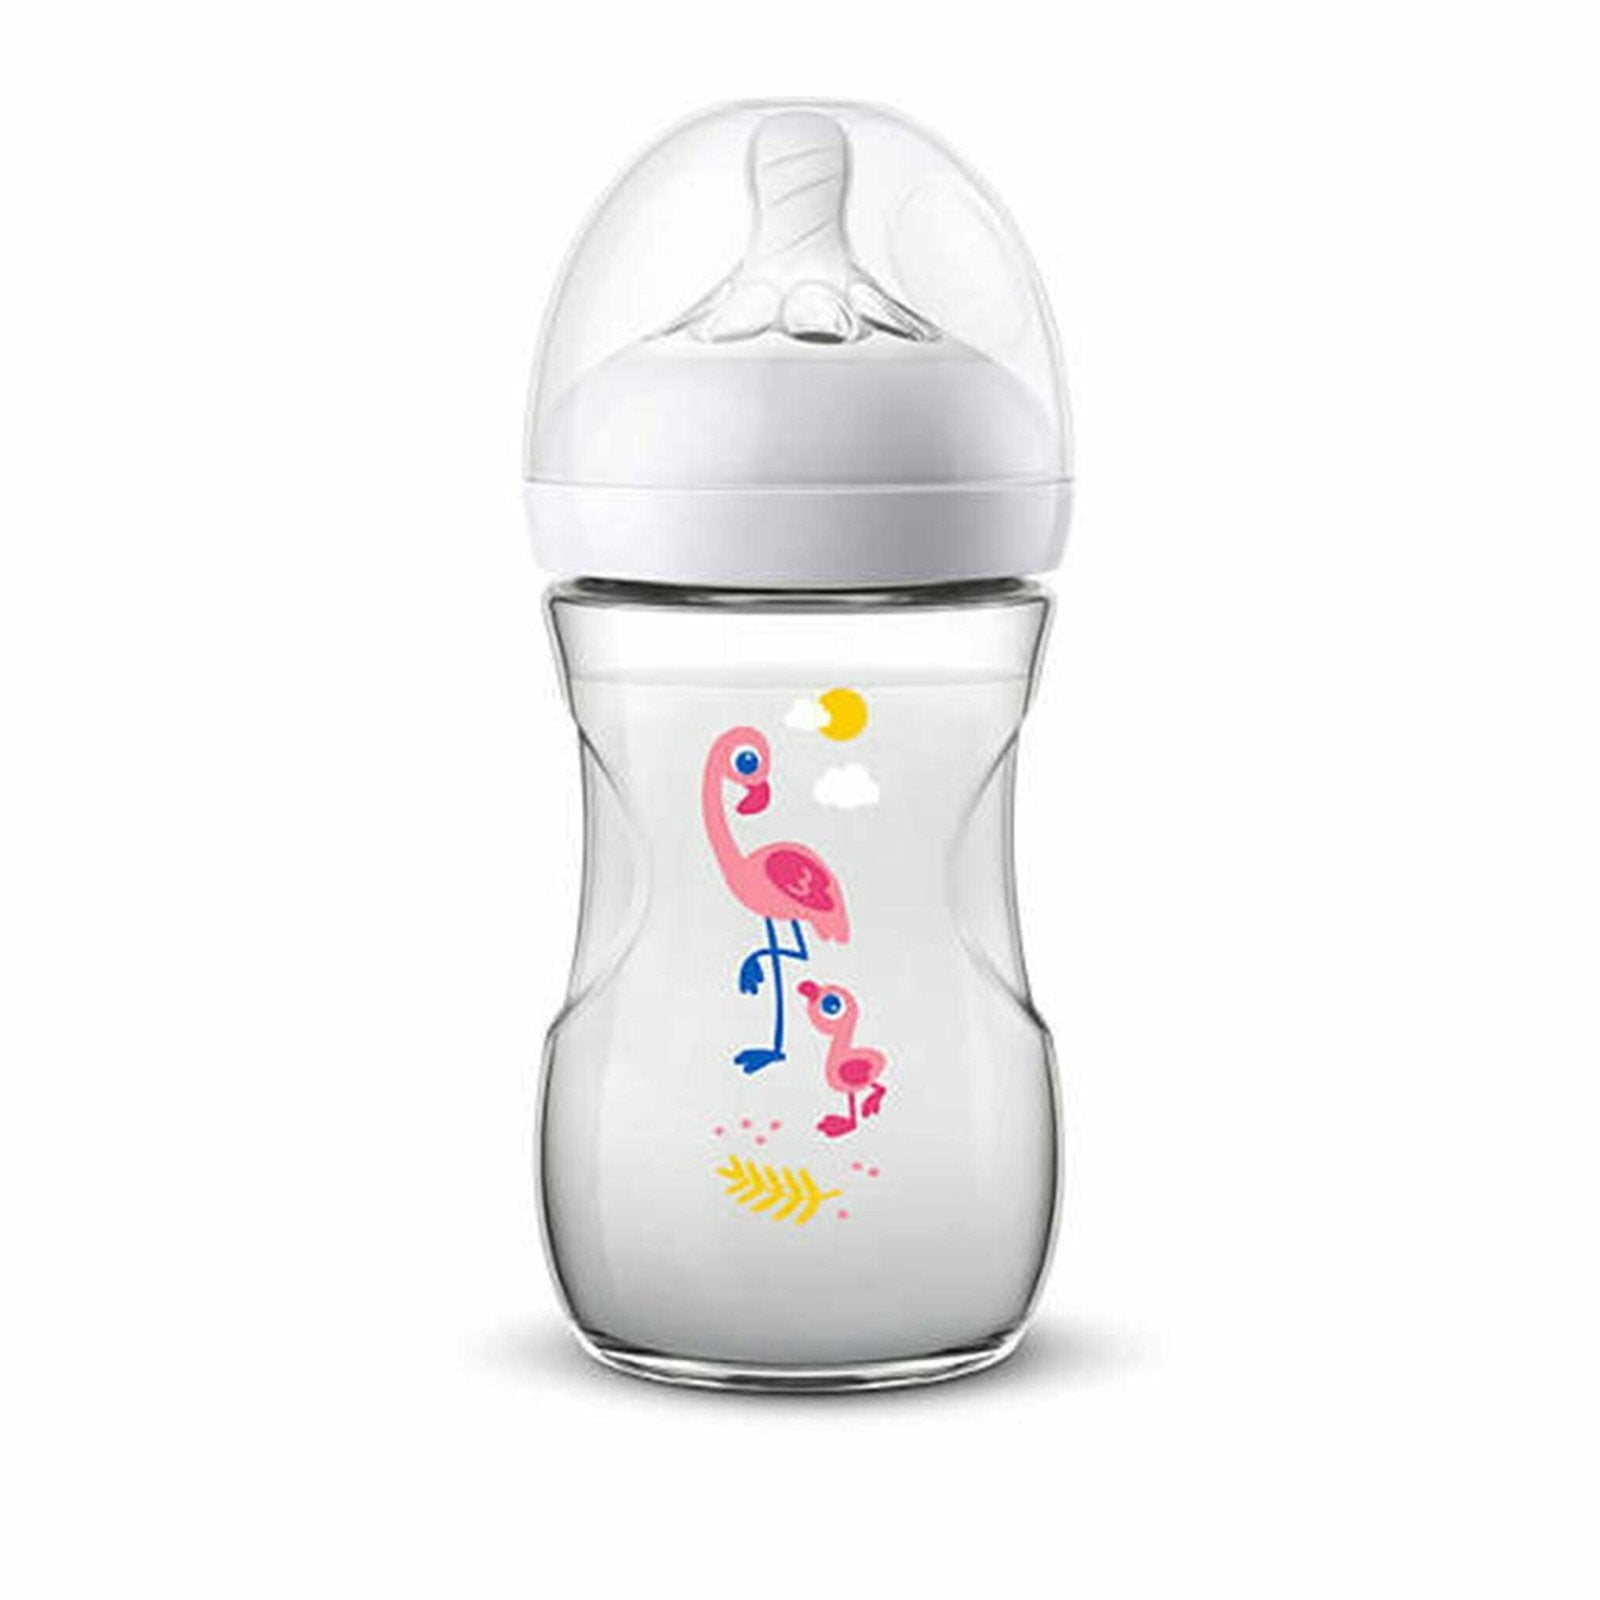 Natural Baby Bottle 1m+ 260ml Flamingo Printed by Avent